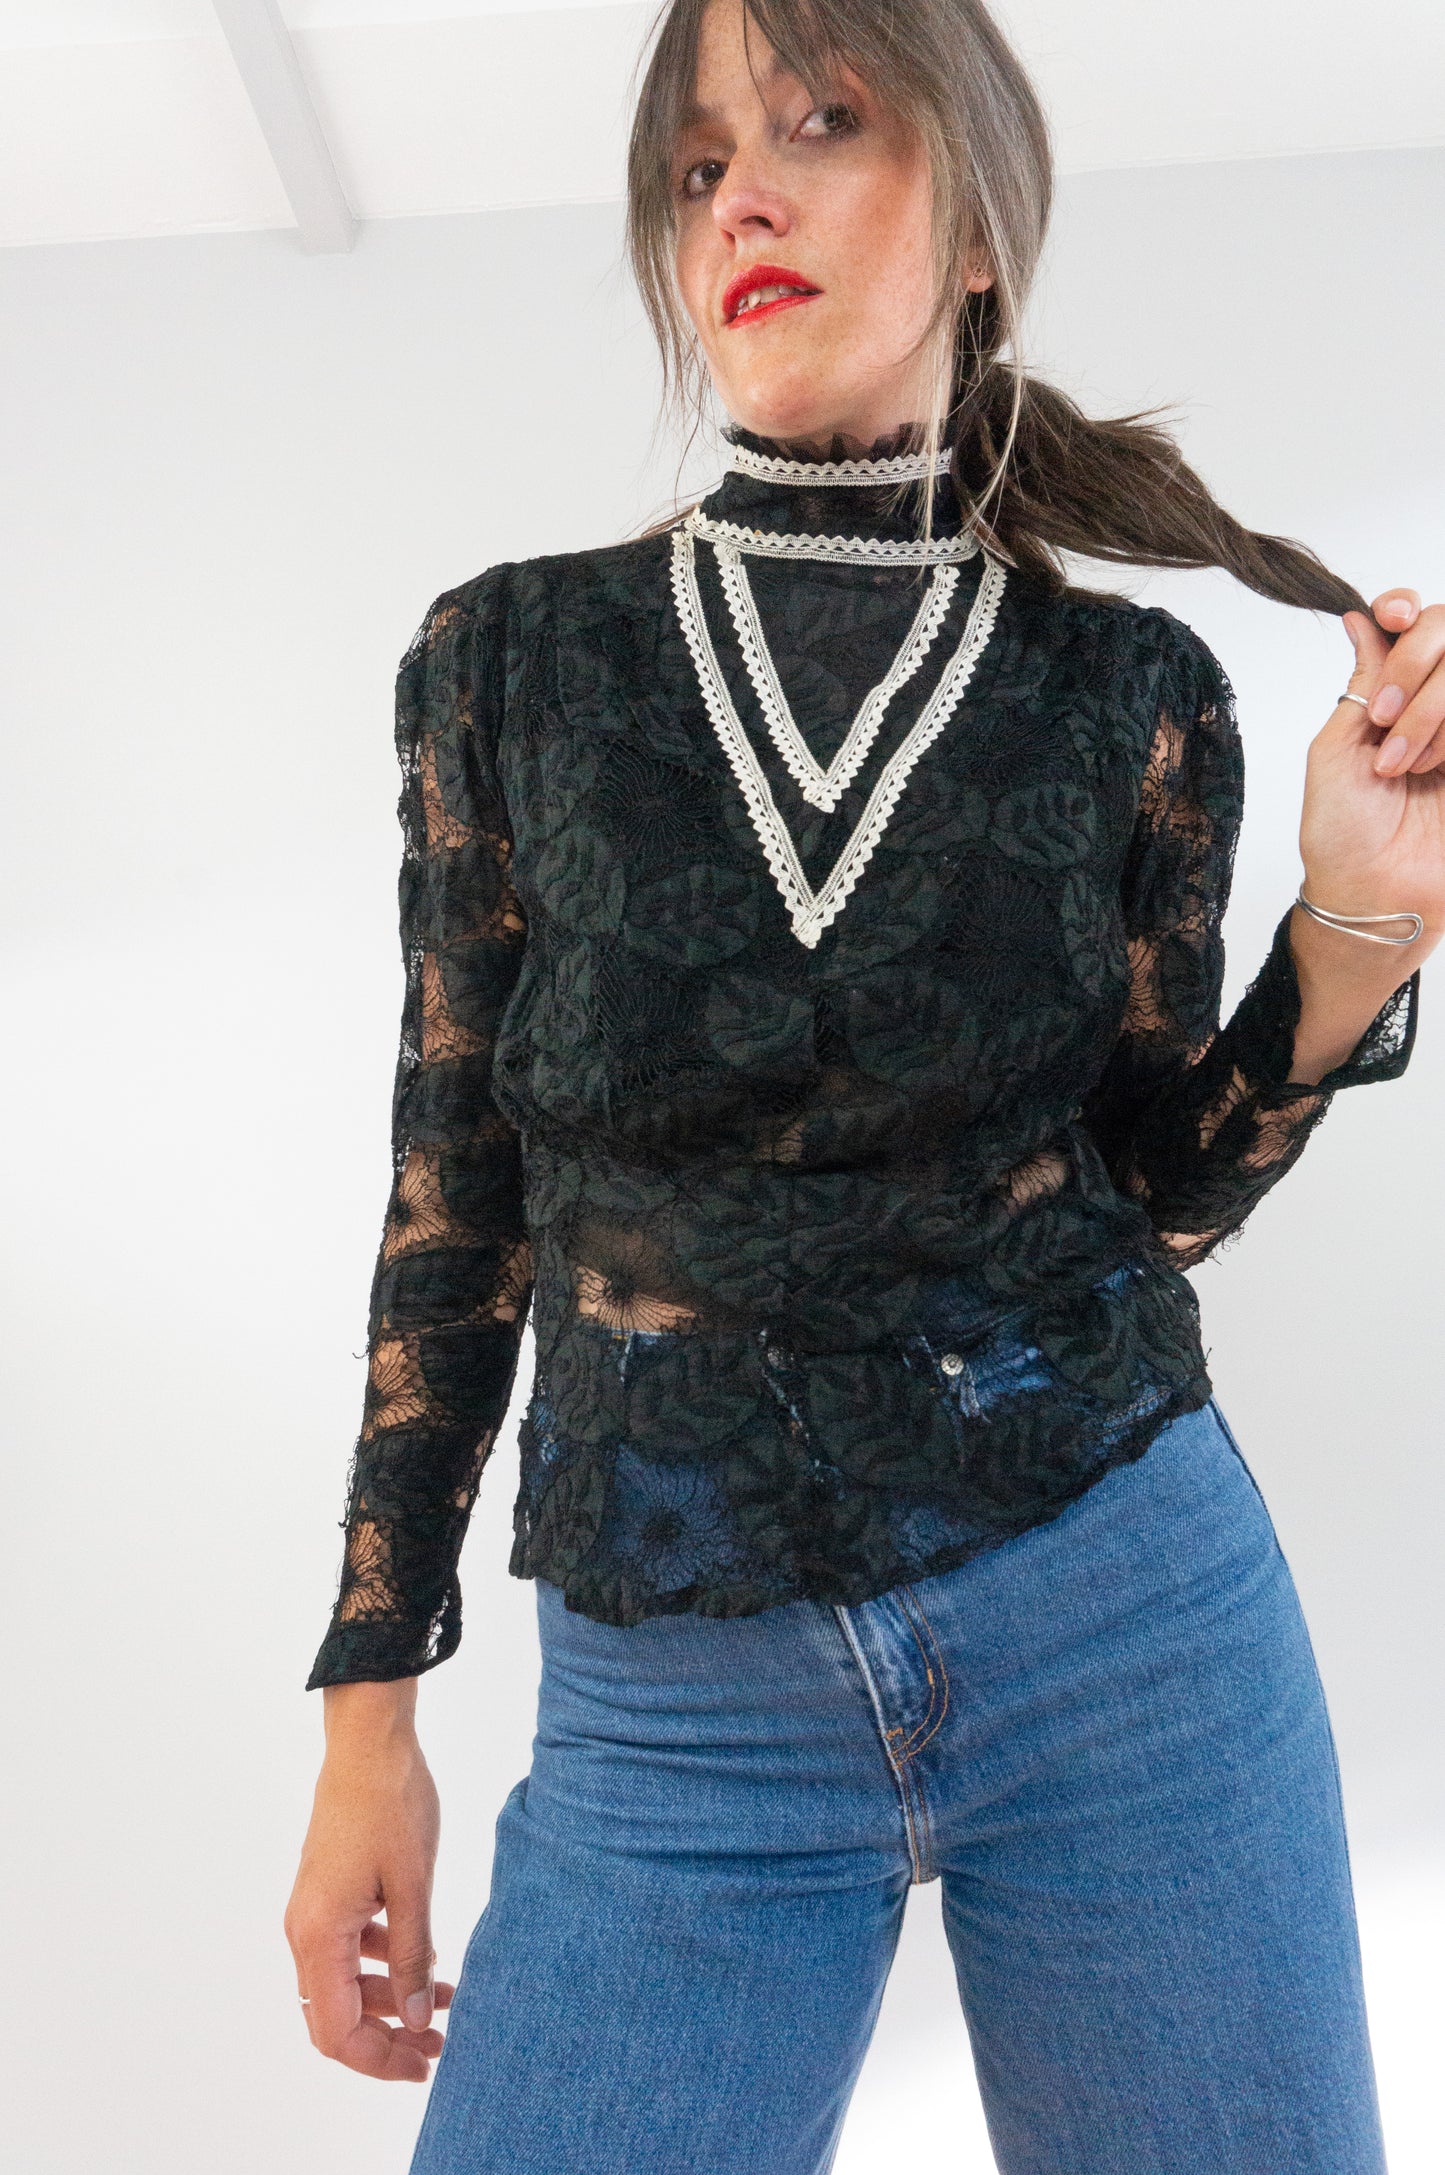 1900 Victorian Ruffle Neck Sheer Black Lace Blouse